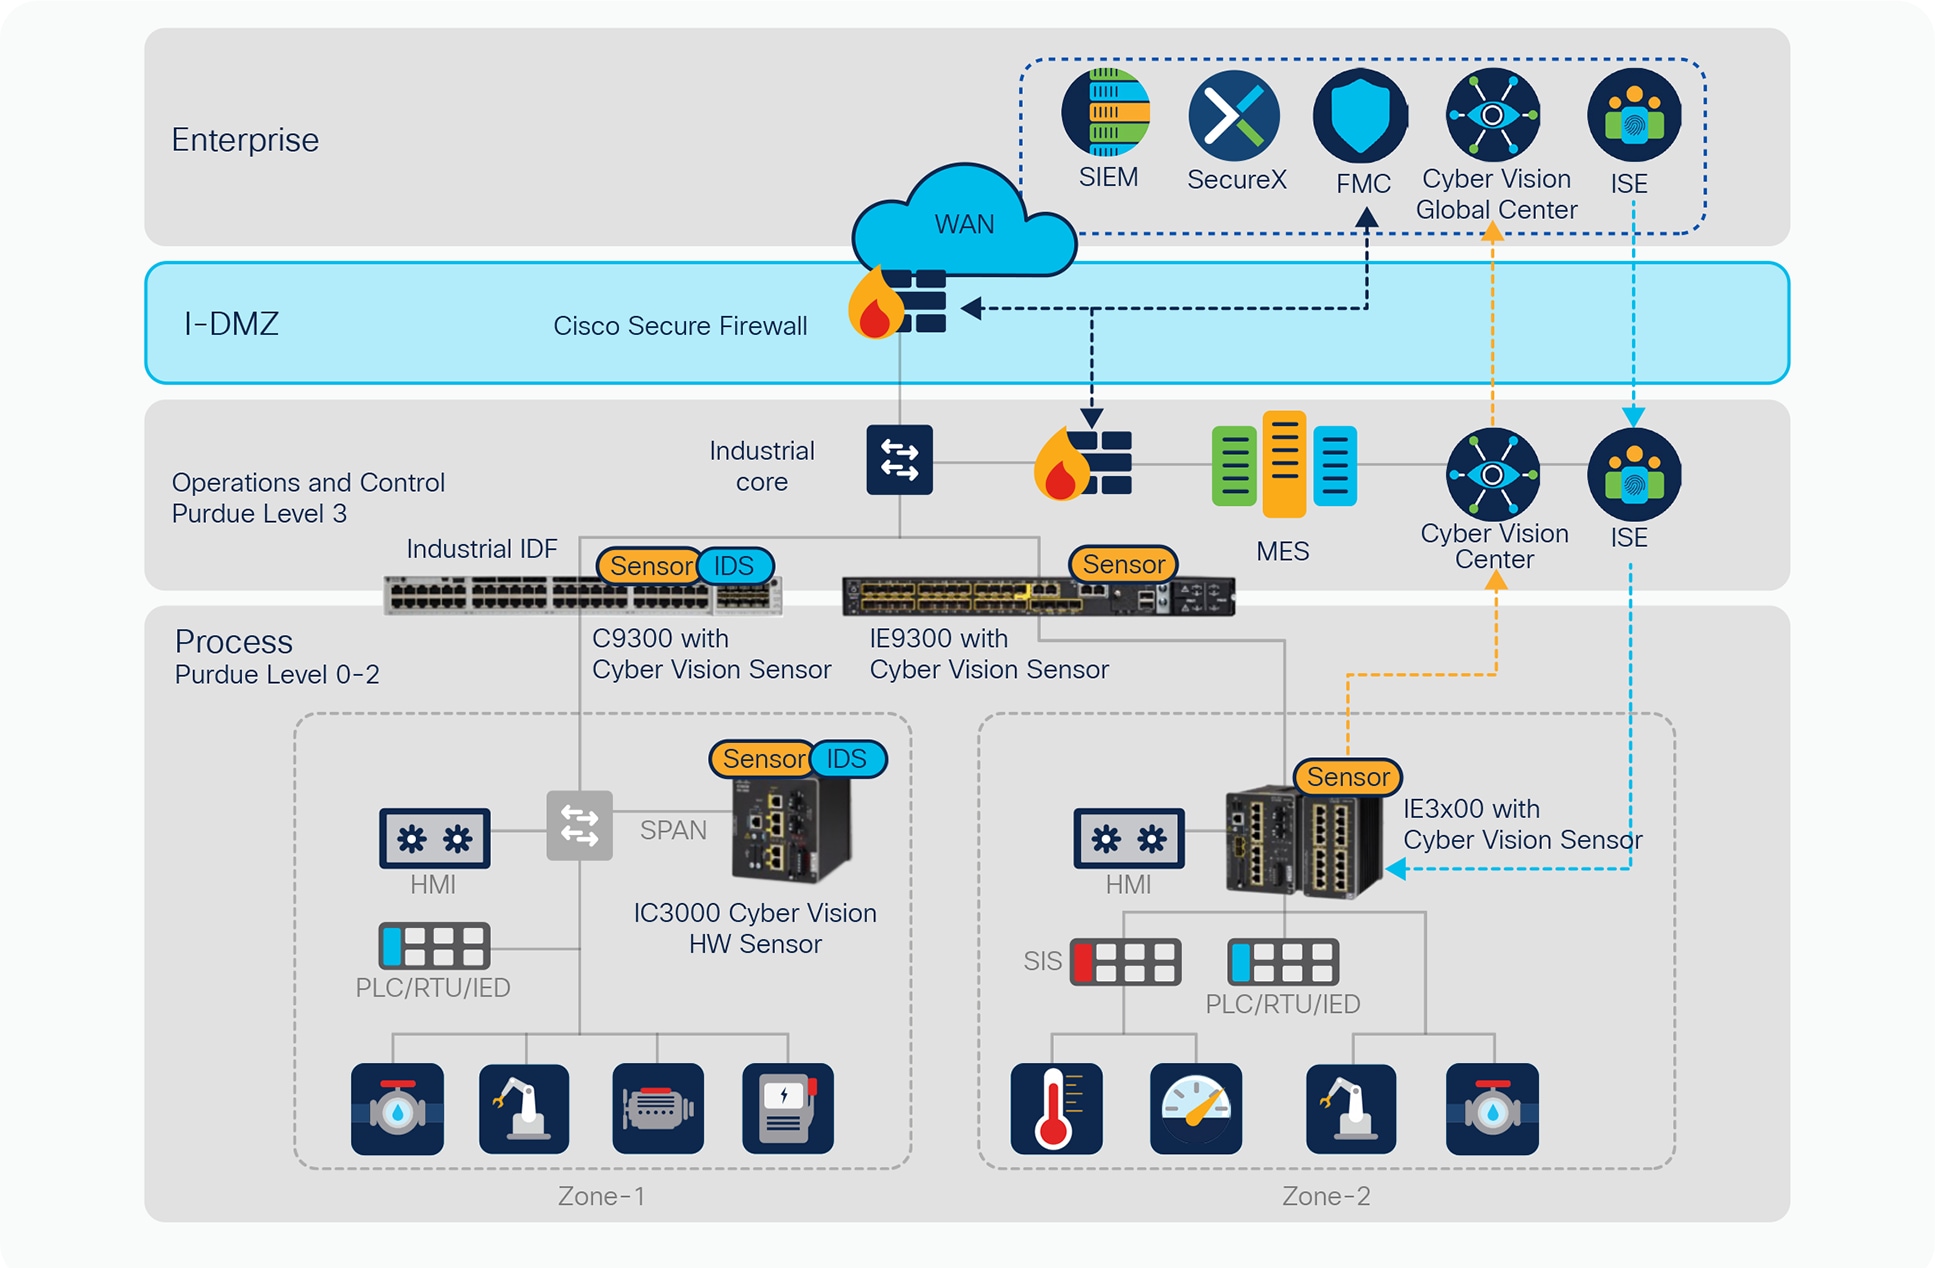 Cisco’s industrial security architecture (source: Cisco OT Security Validated Design)